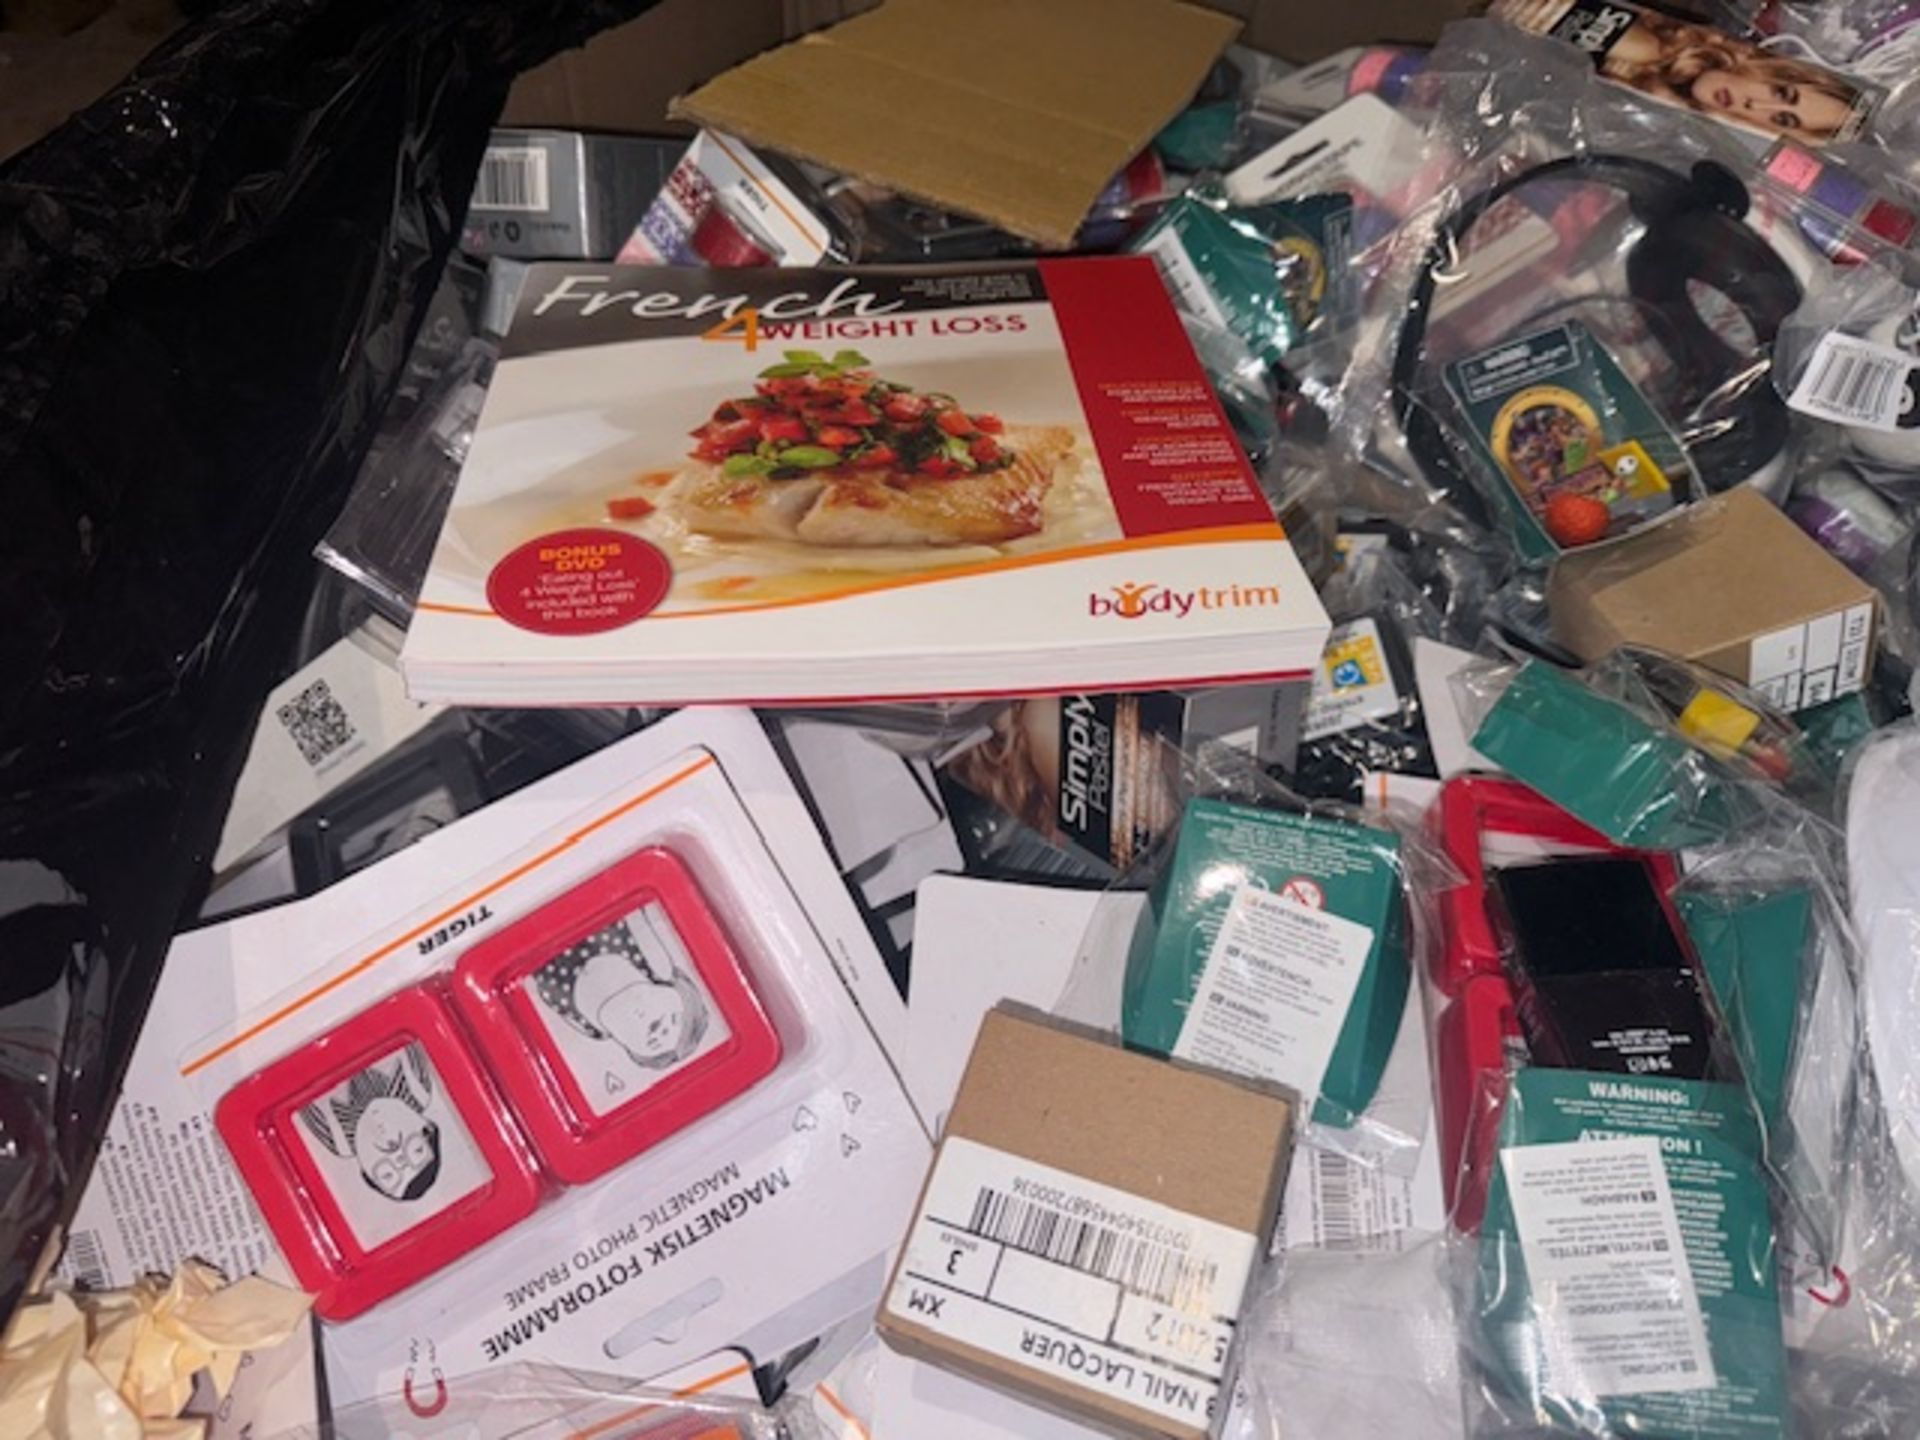 1000 PIECE BRAND NEW MIXED AMAZON OVERSTOCK LOT INCLUDING TOYS,, HATS, GLOVES, PET PRODUCTS, - Bild 3 aus 3